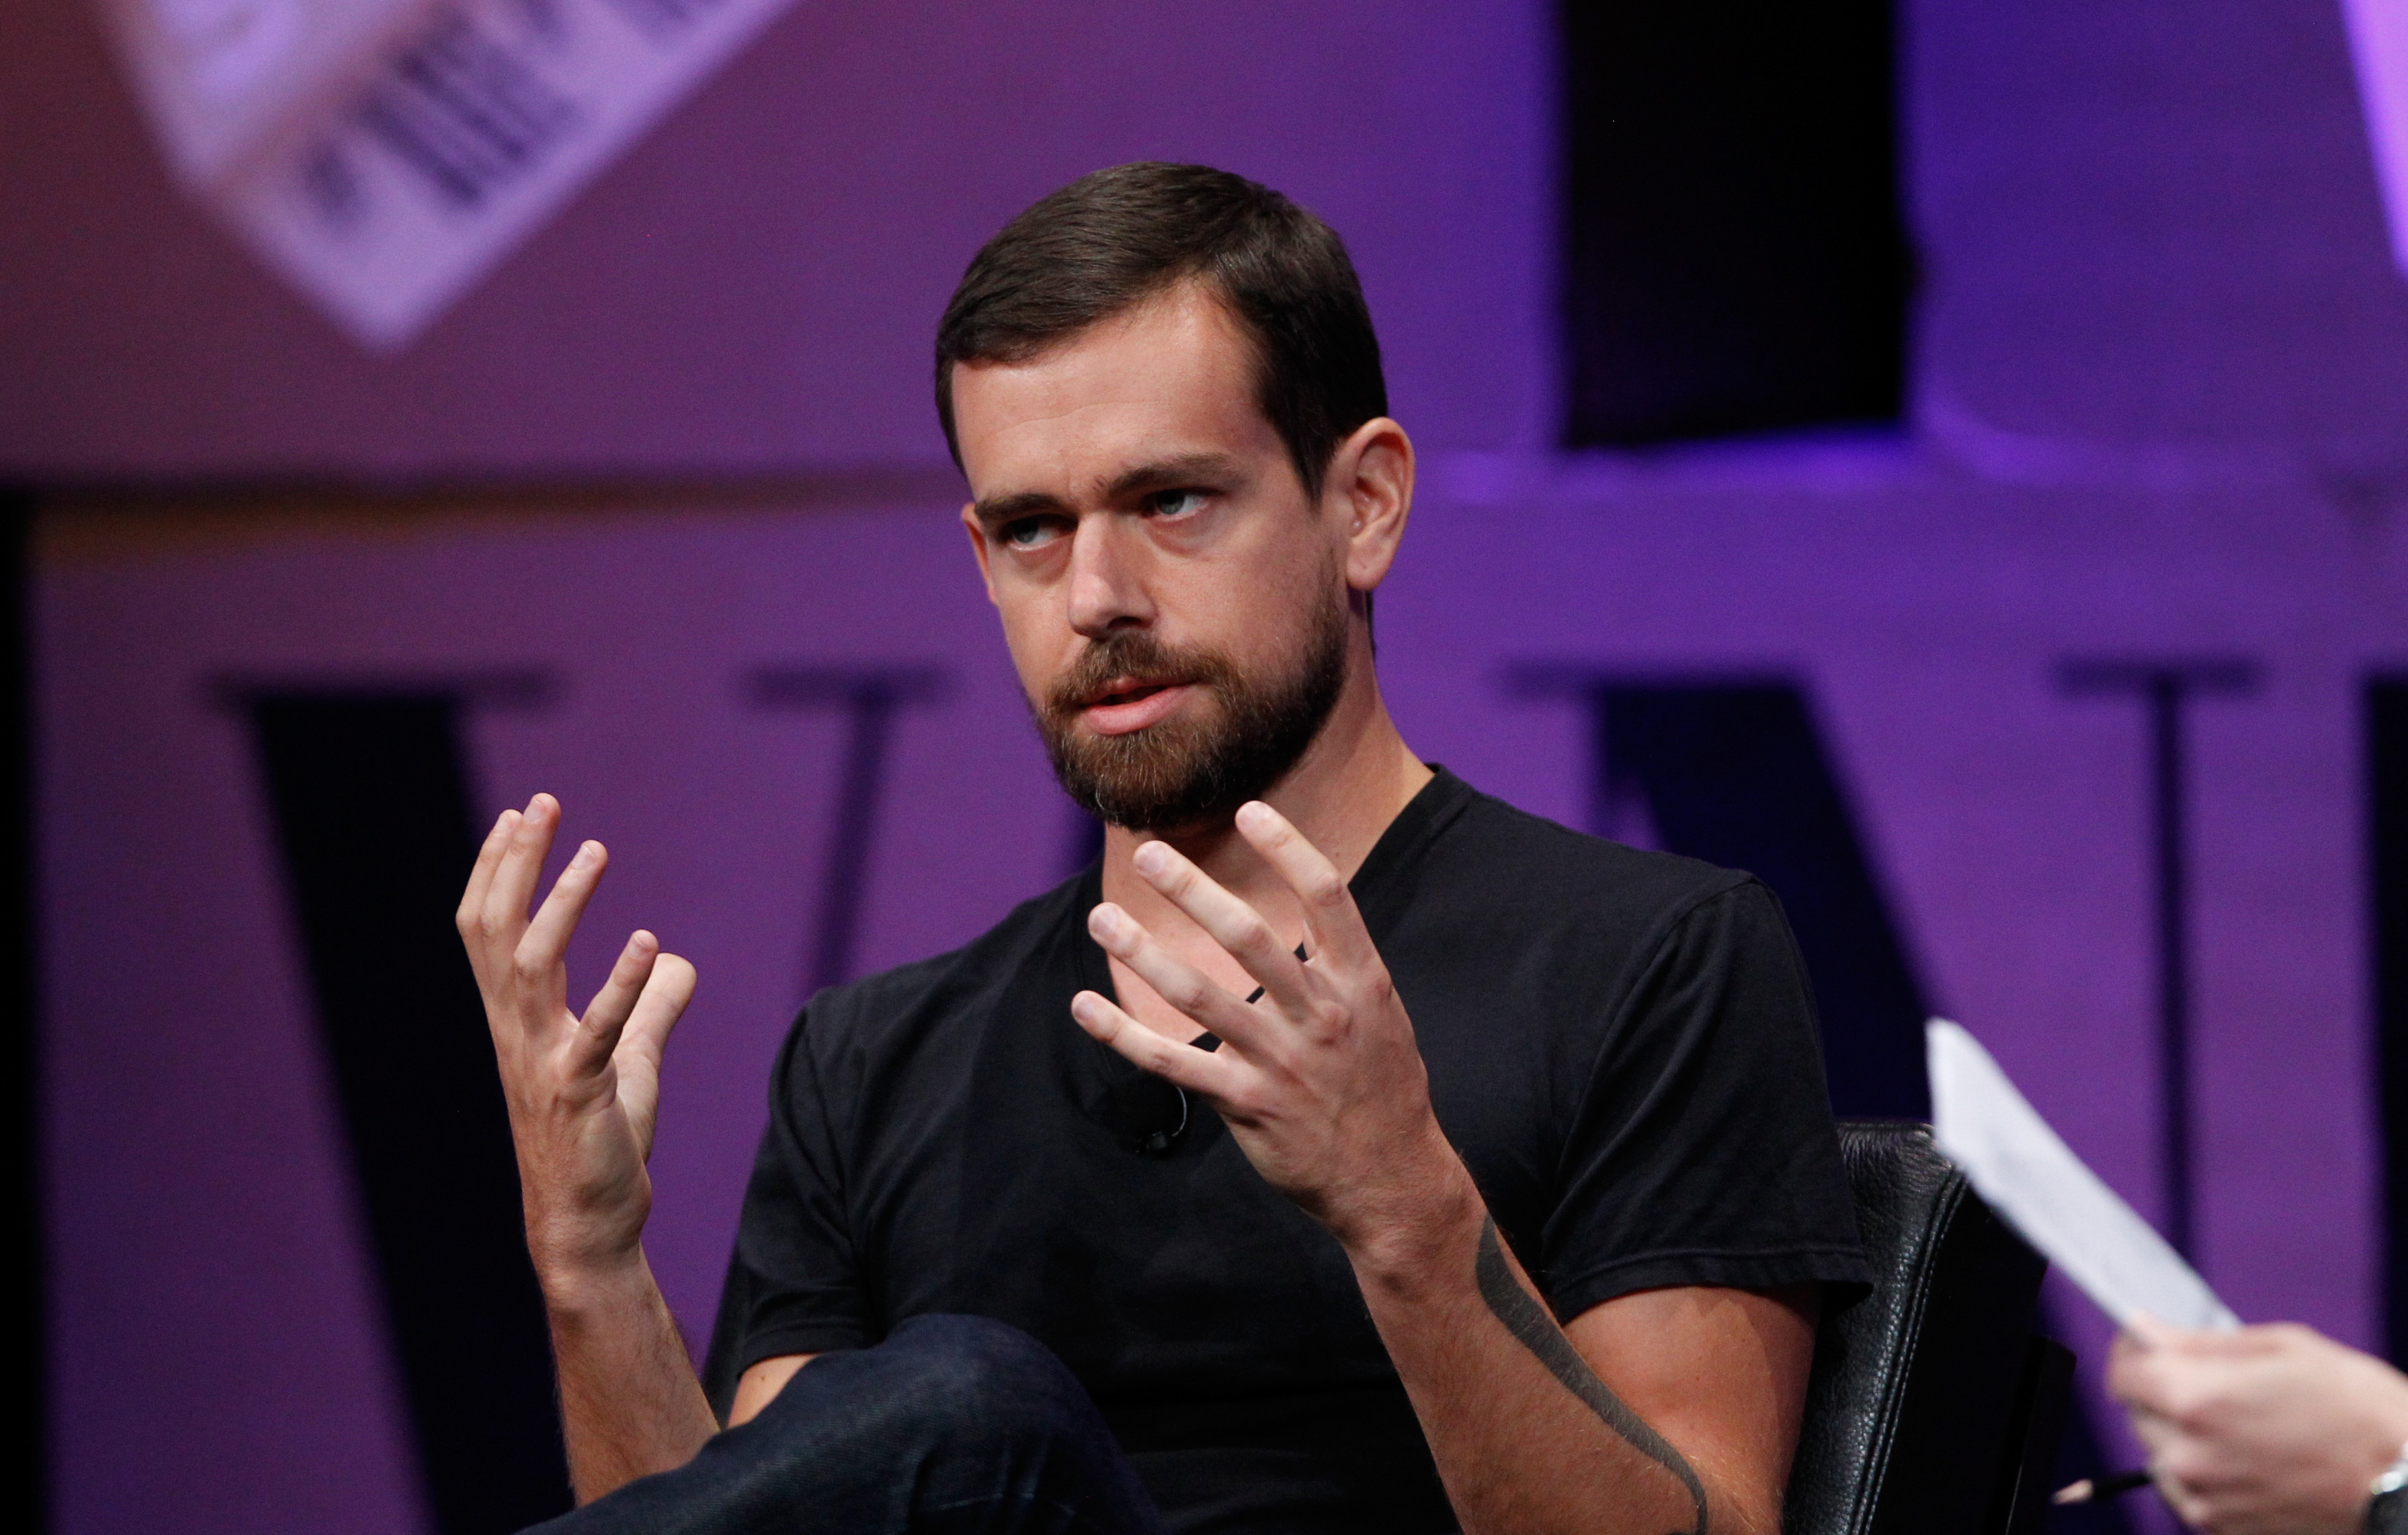 Twitter Co-Founder and Chairman and Square CEO Jack Dorsey speaks onstage during "From 7 Dwarves to 140 Characters" at the Vanity Fair New Establishment Summit at Yerba Buena Center for the Arts on October 9, 2014 in San Francisco, California. (Kimberly White&mdash;Getty Images for Vanity Fair)